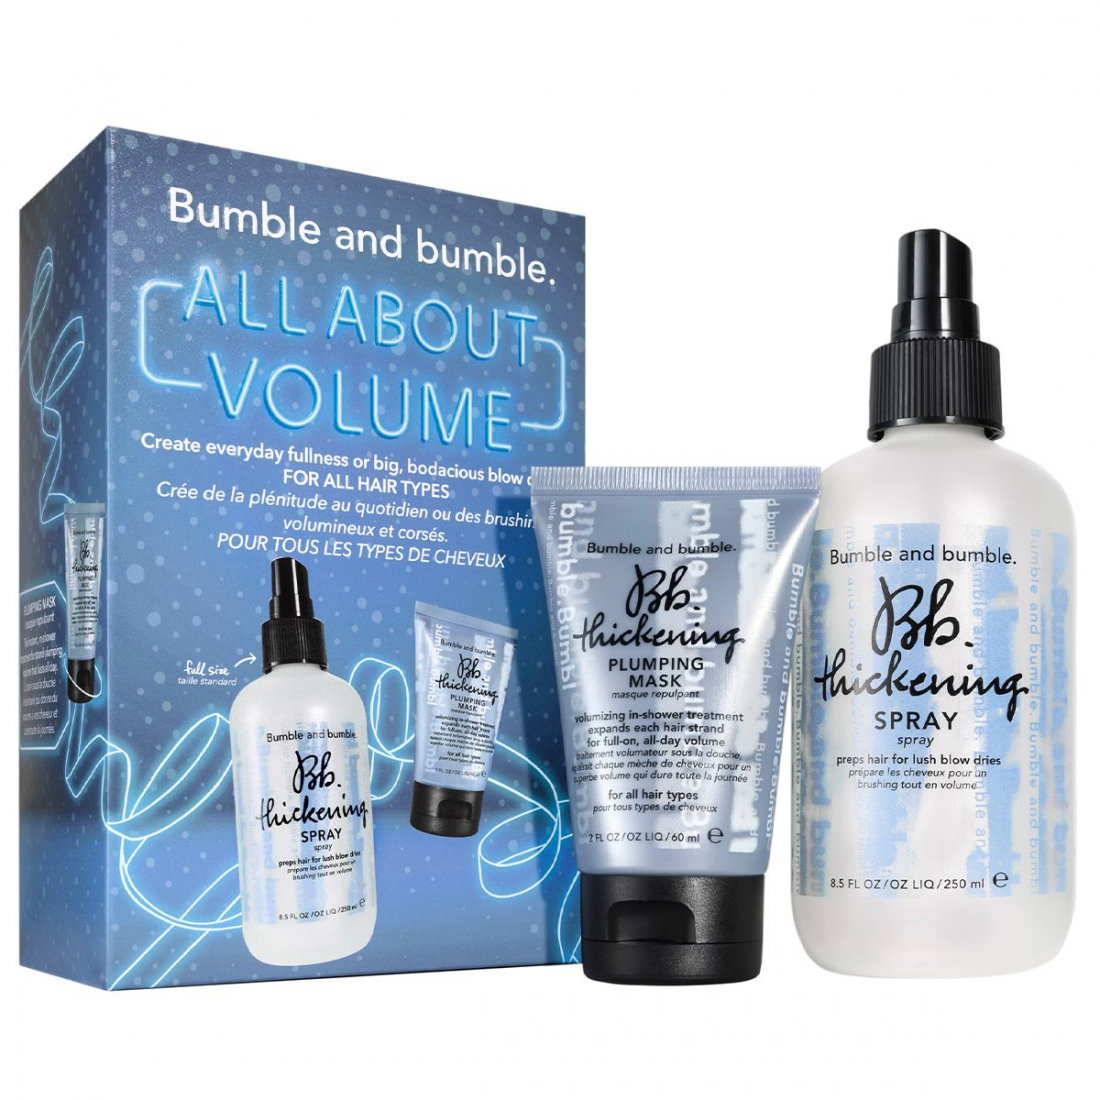 'All about volume' Hair Care Set - 2 Pieces